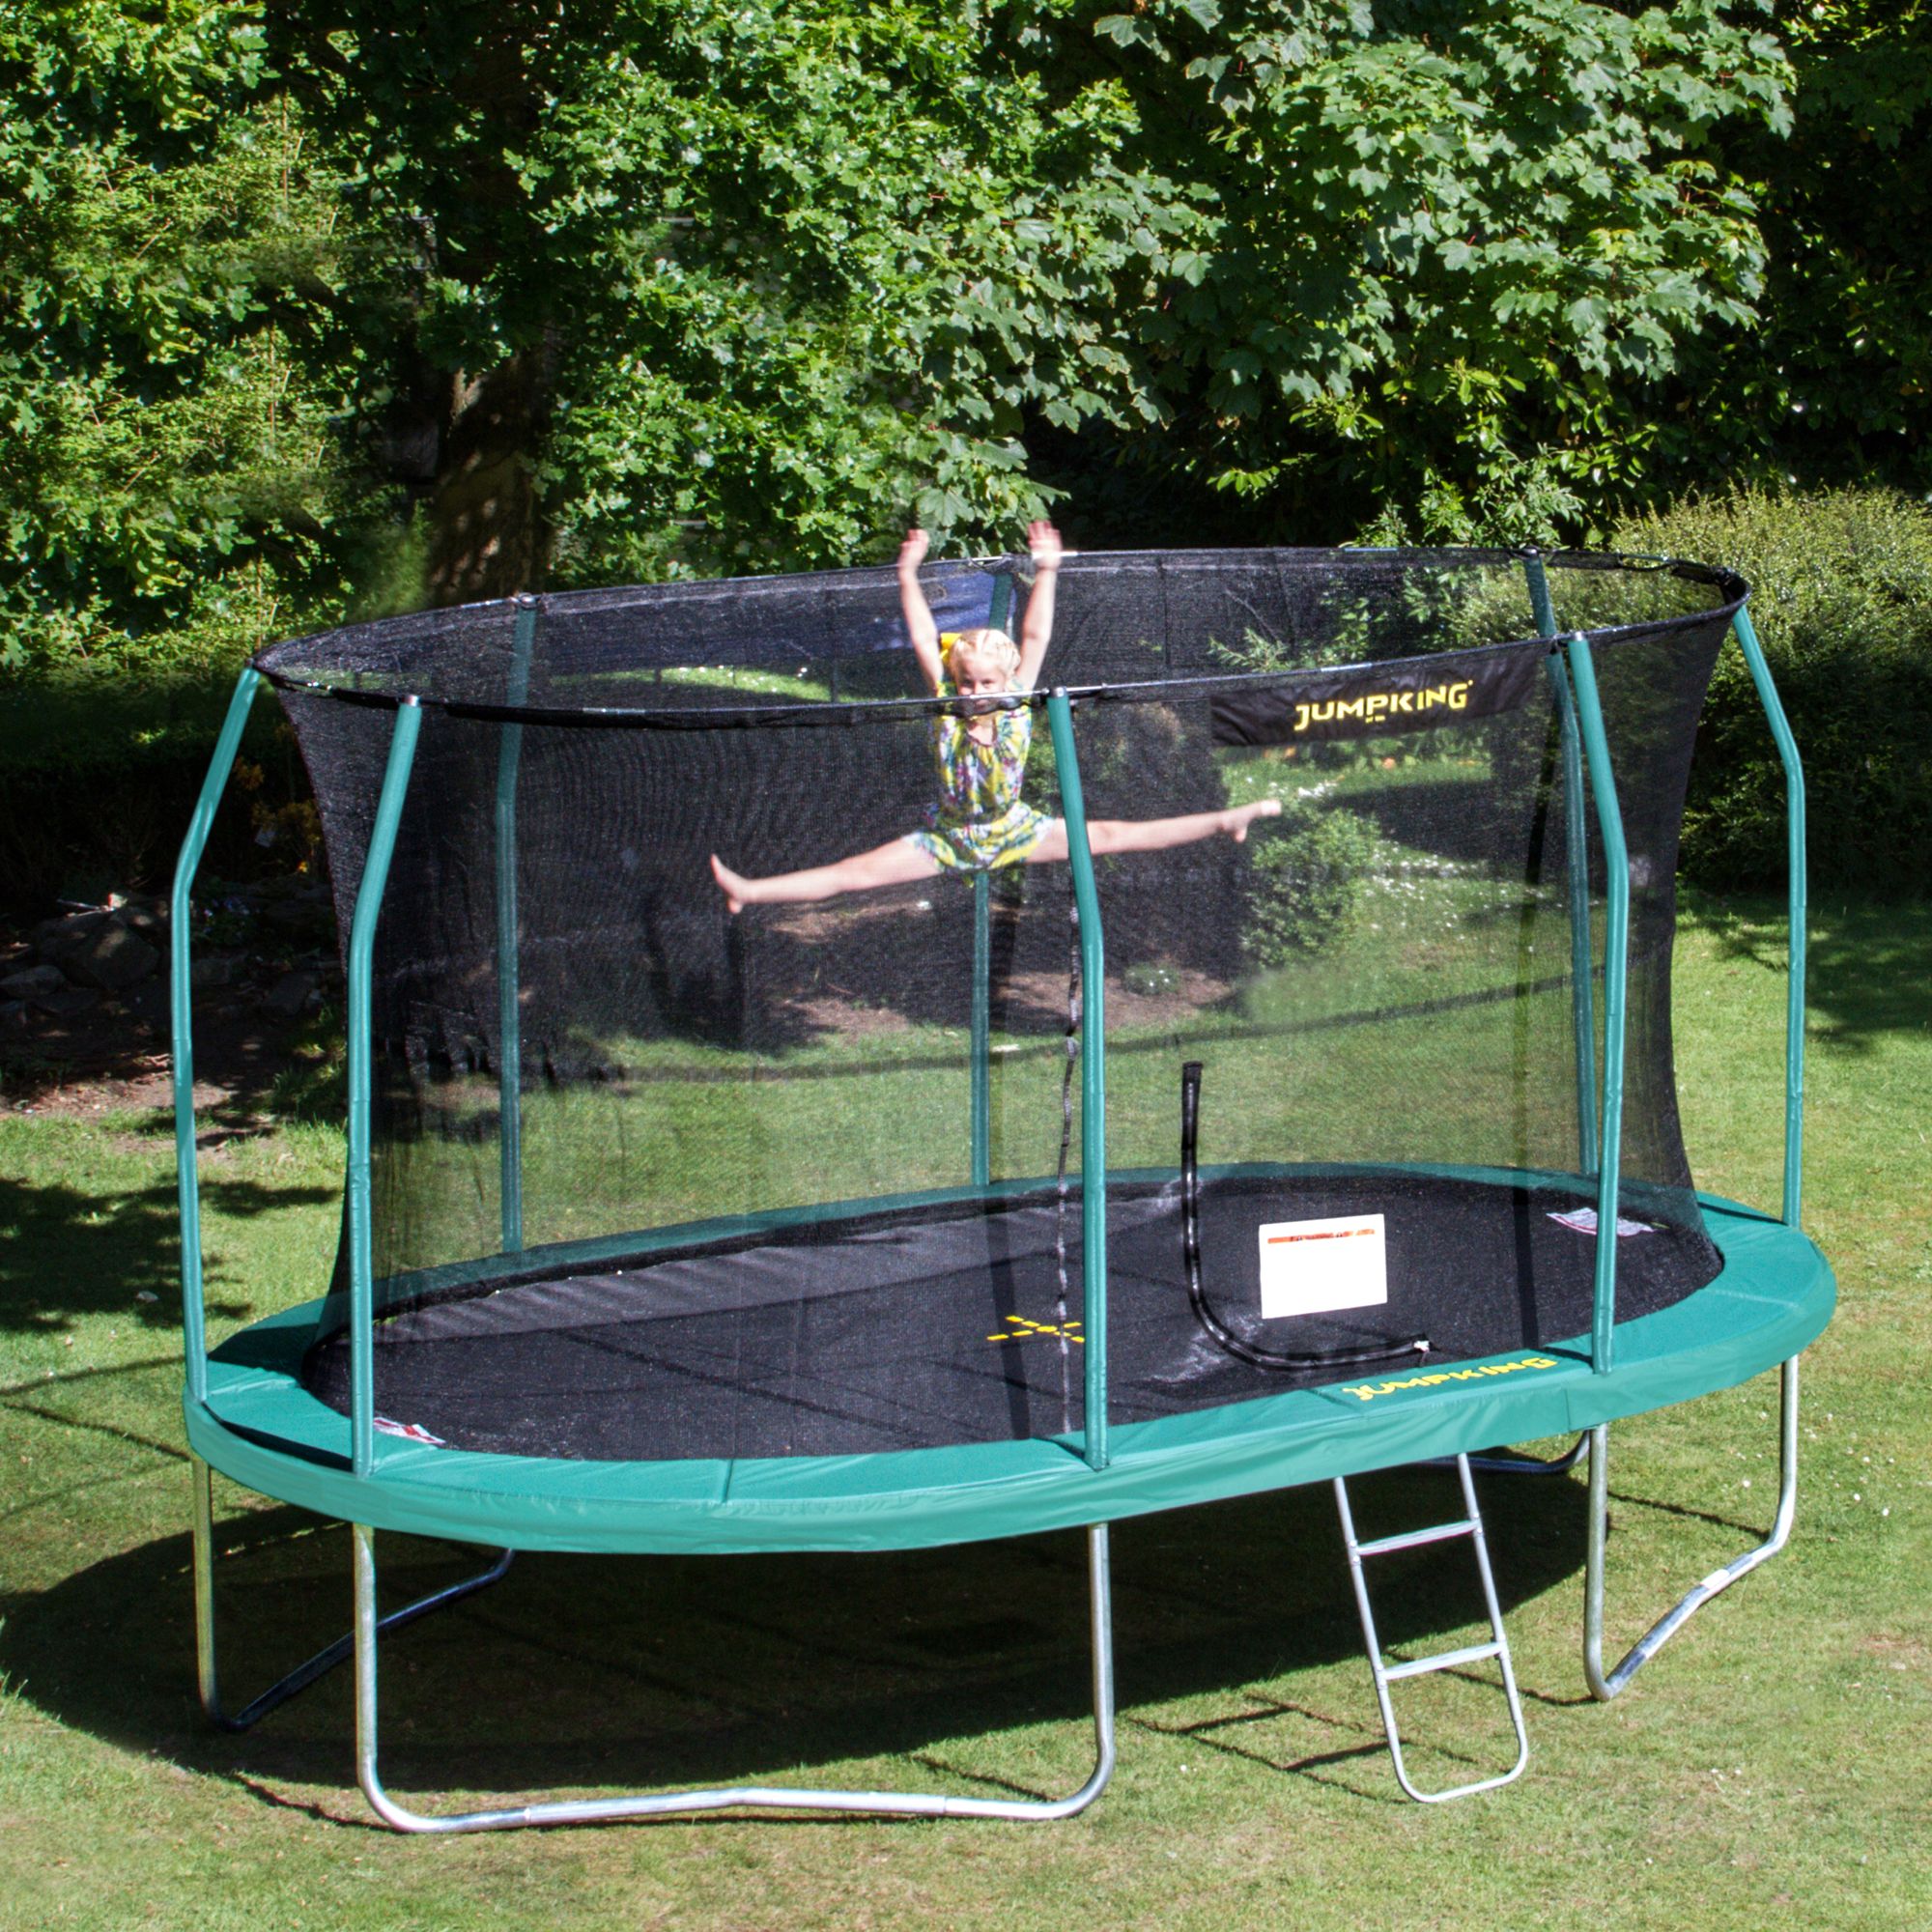 JumpKing 9 x 13ft Oval Trampoline at John Lewis & Partners